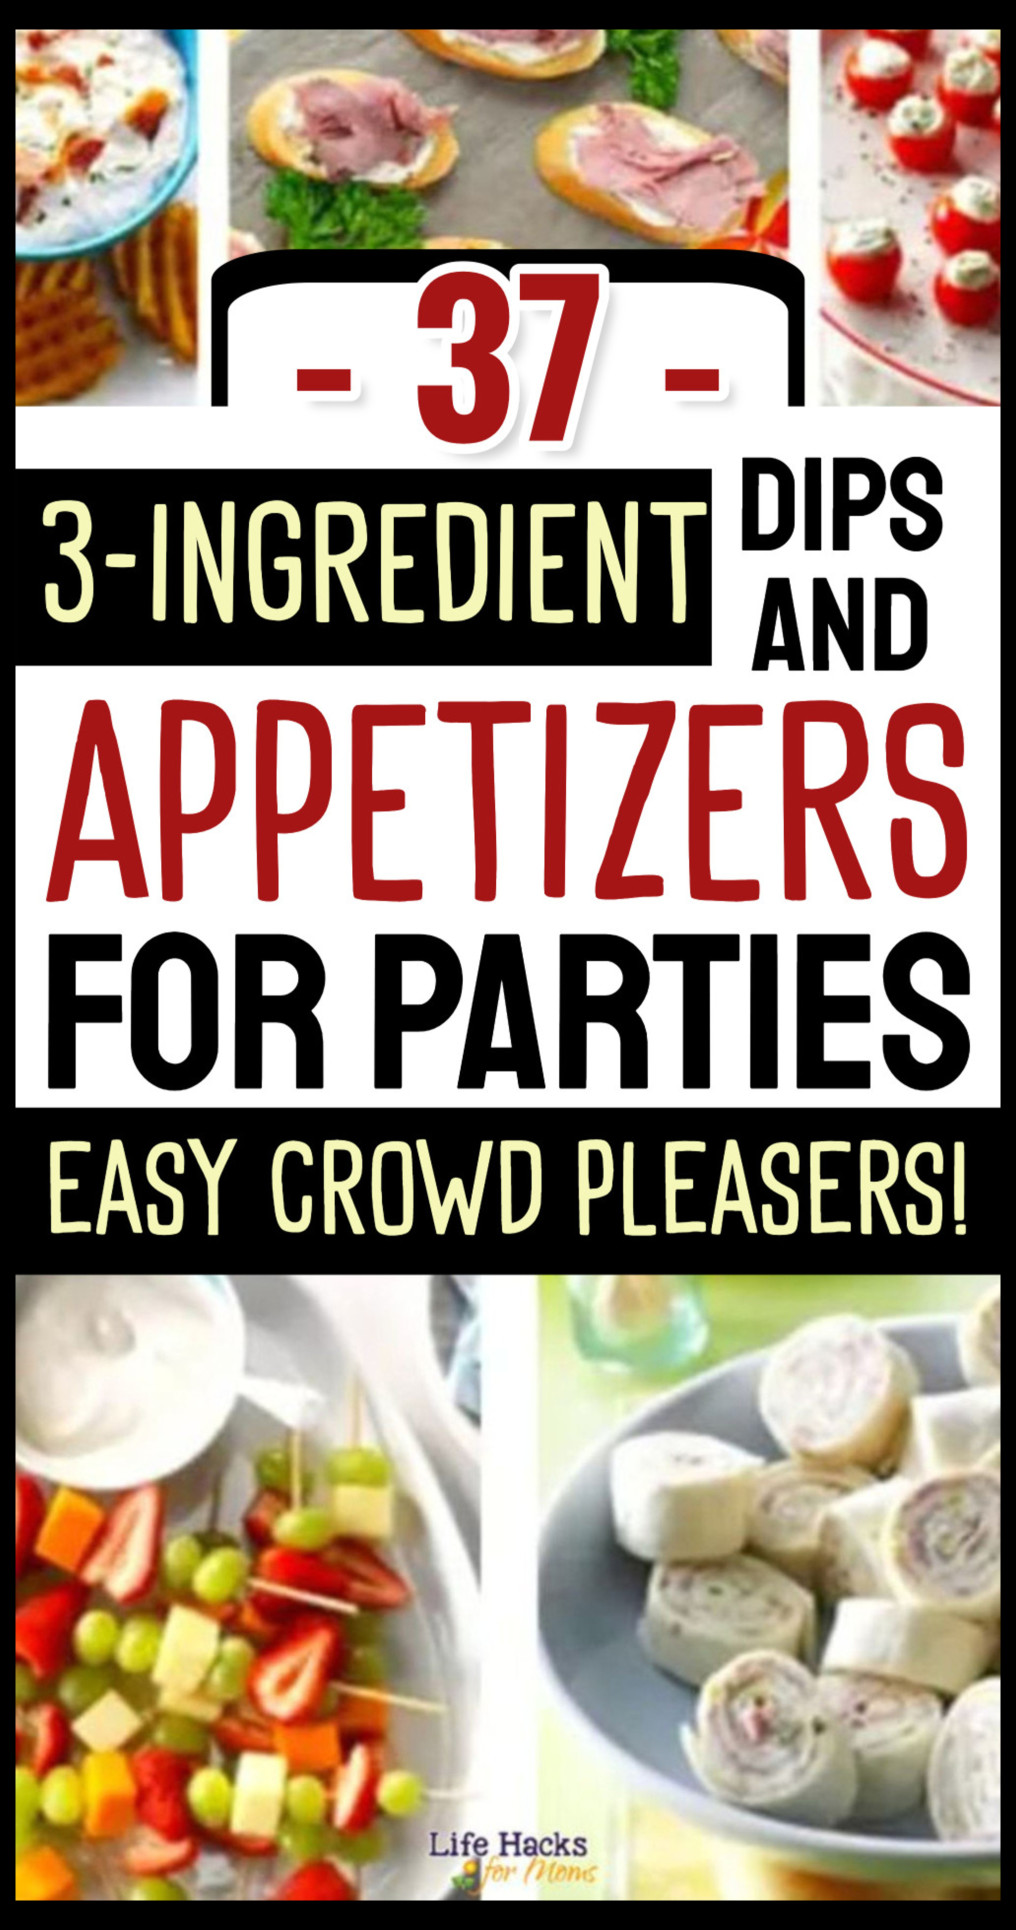 37 3-Ingredient Dips and Appetizers For Parties - Easy Crowd Pleasers